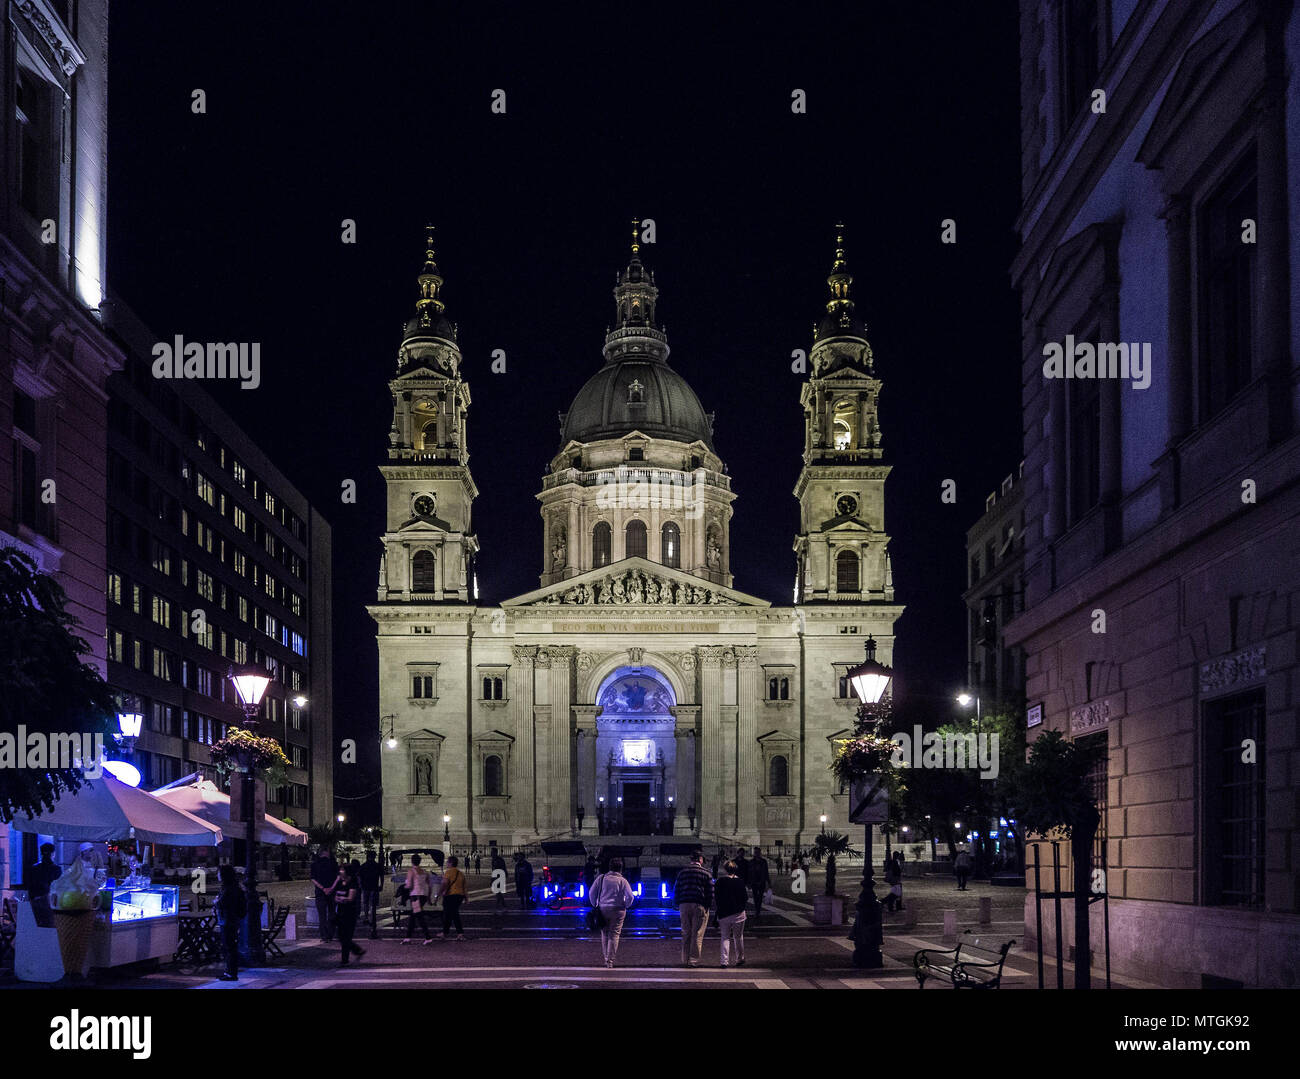 Szent István-bazilika/St Stephen's Basilica is a Roman Catholic basilica in Budapest, Hungary. It is named in honour of Stephen, the first King(Wikip Stock Photo